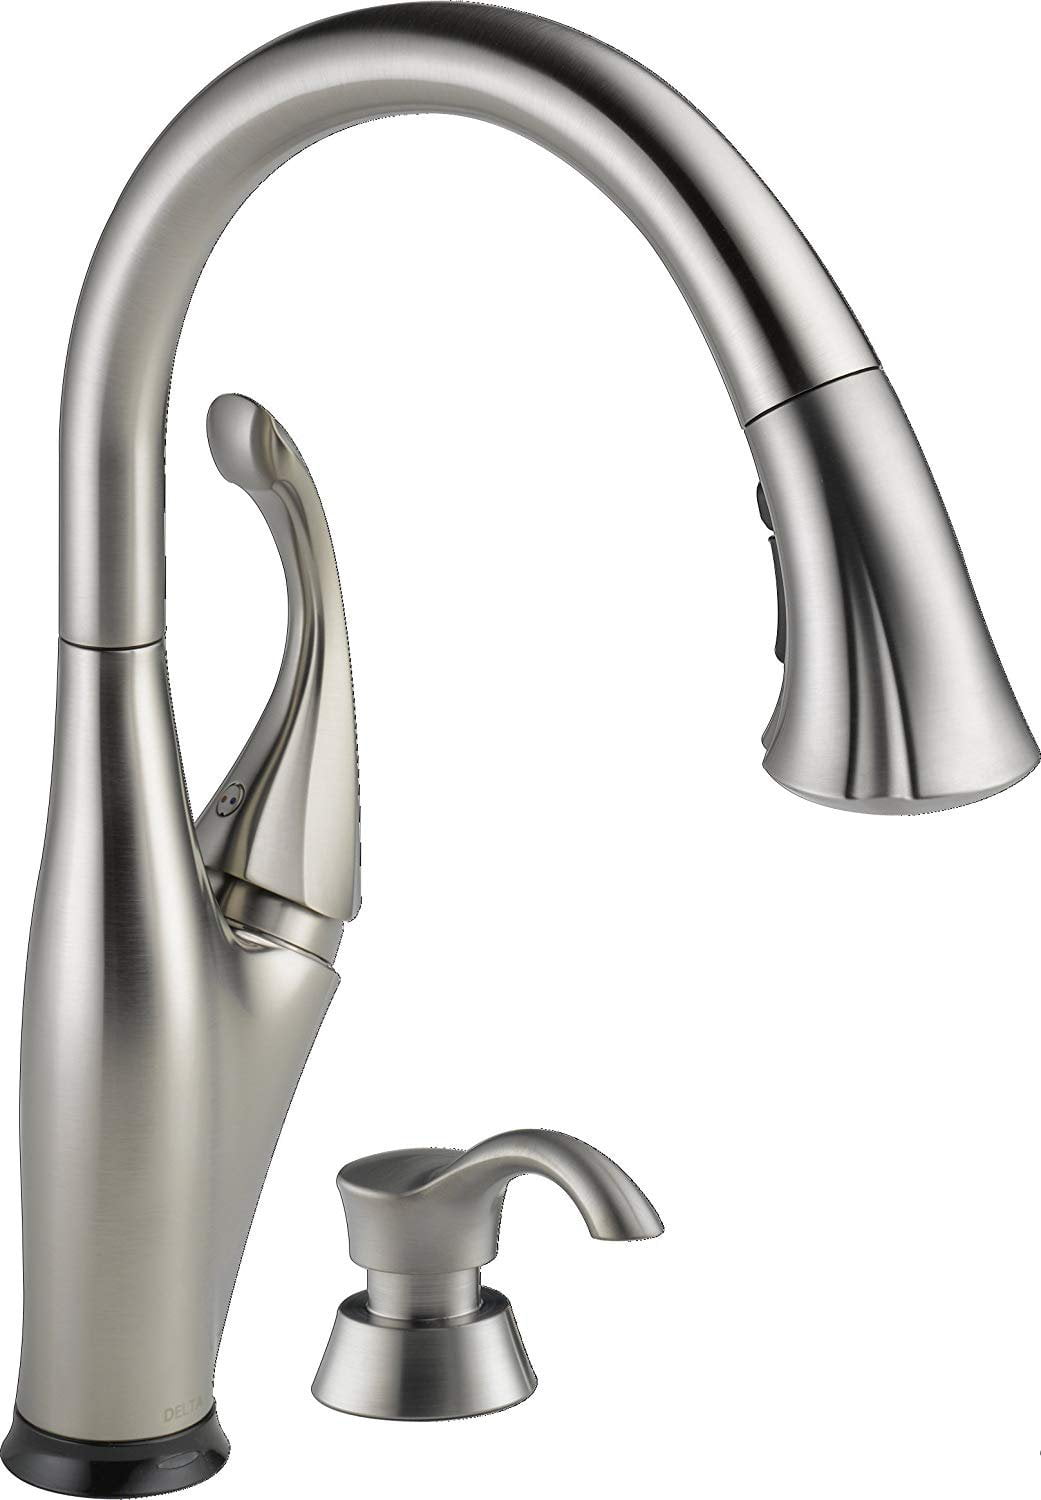 delta-faucet-addison-single-handle-touch-kitchen-sink-faucet-with-pull